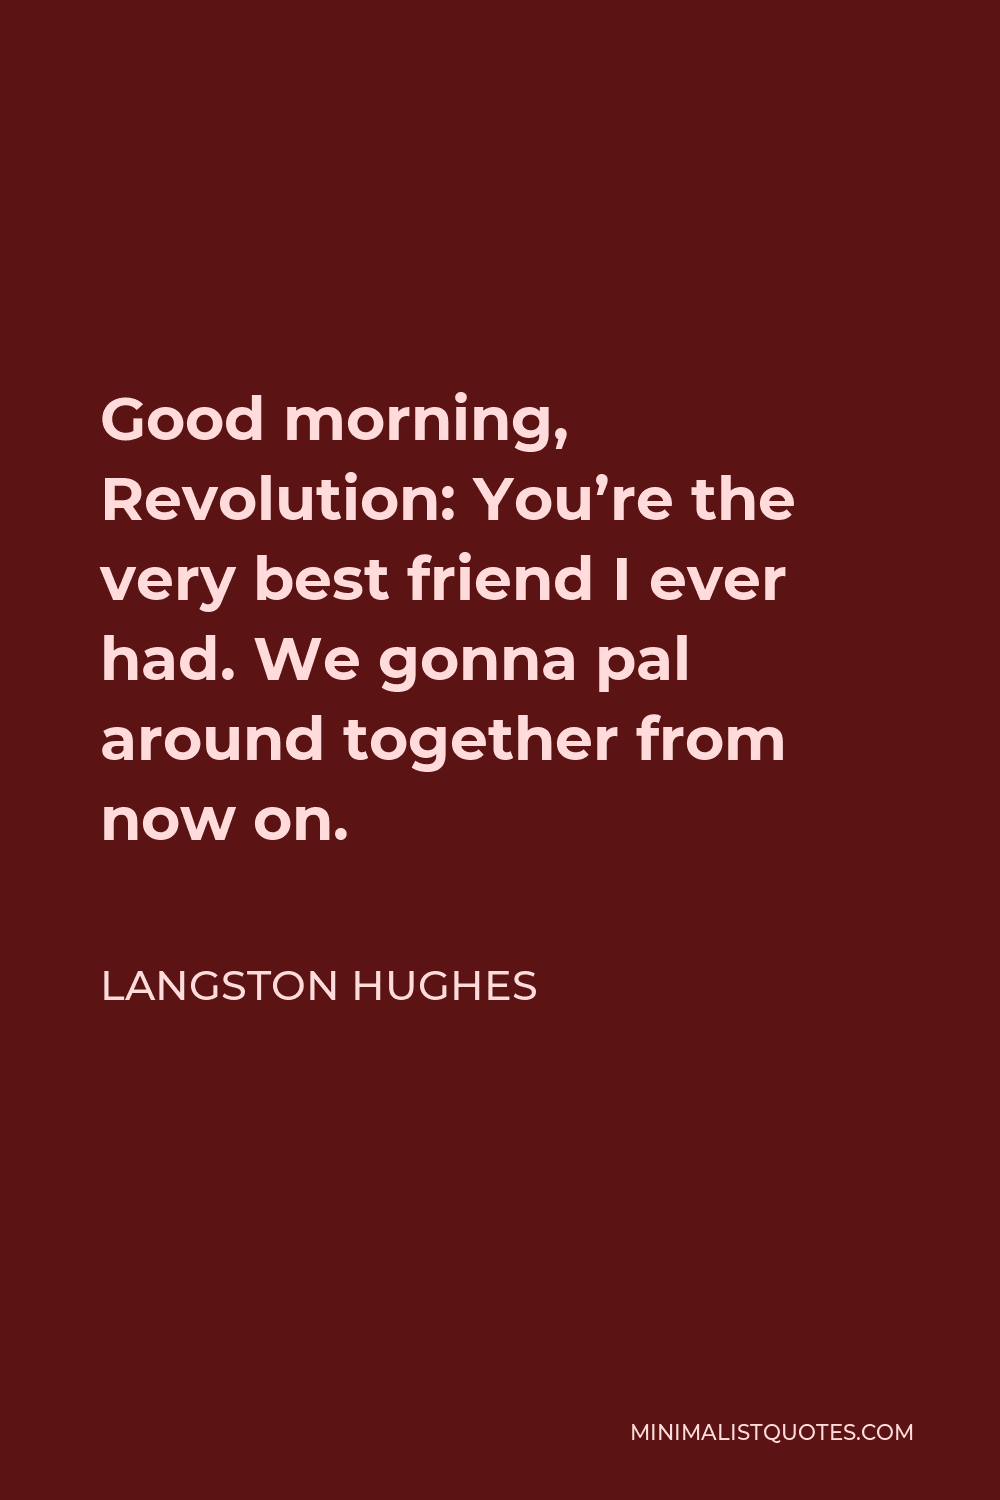 Langston Hughes Quote - Good morning, Revolution: You’re the very best friend I ever had. We gonna pal around together from now on.